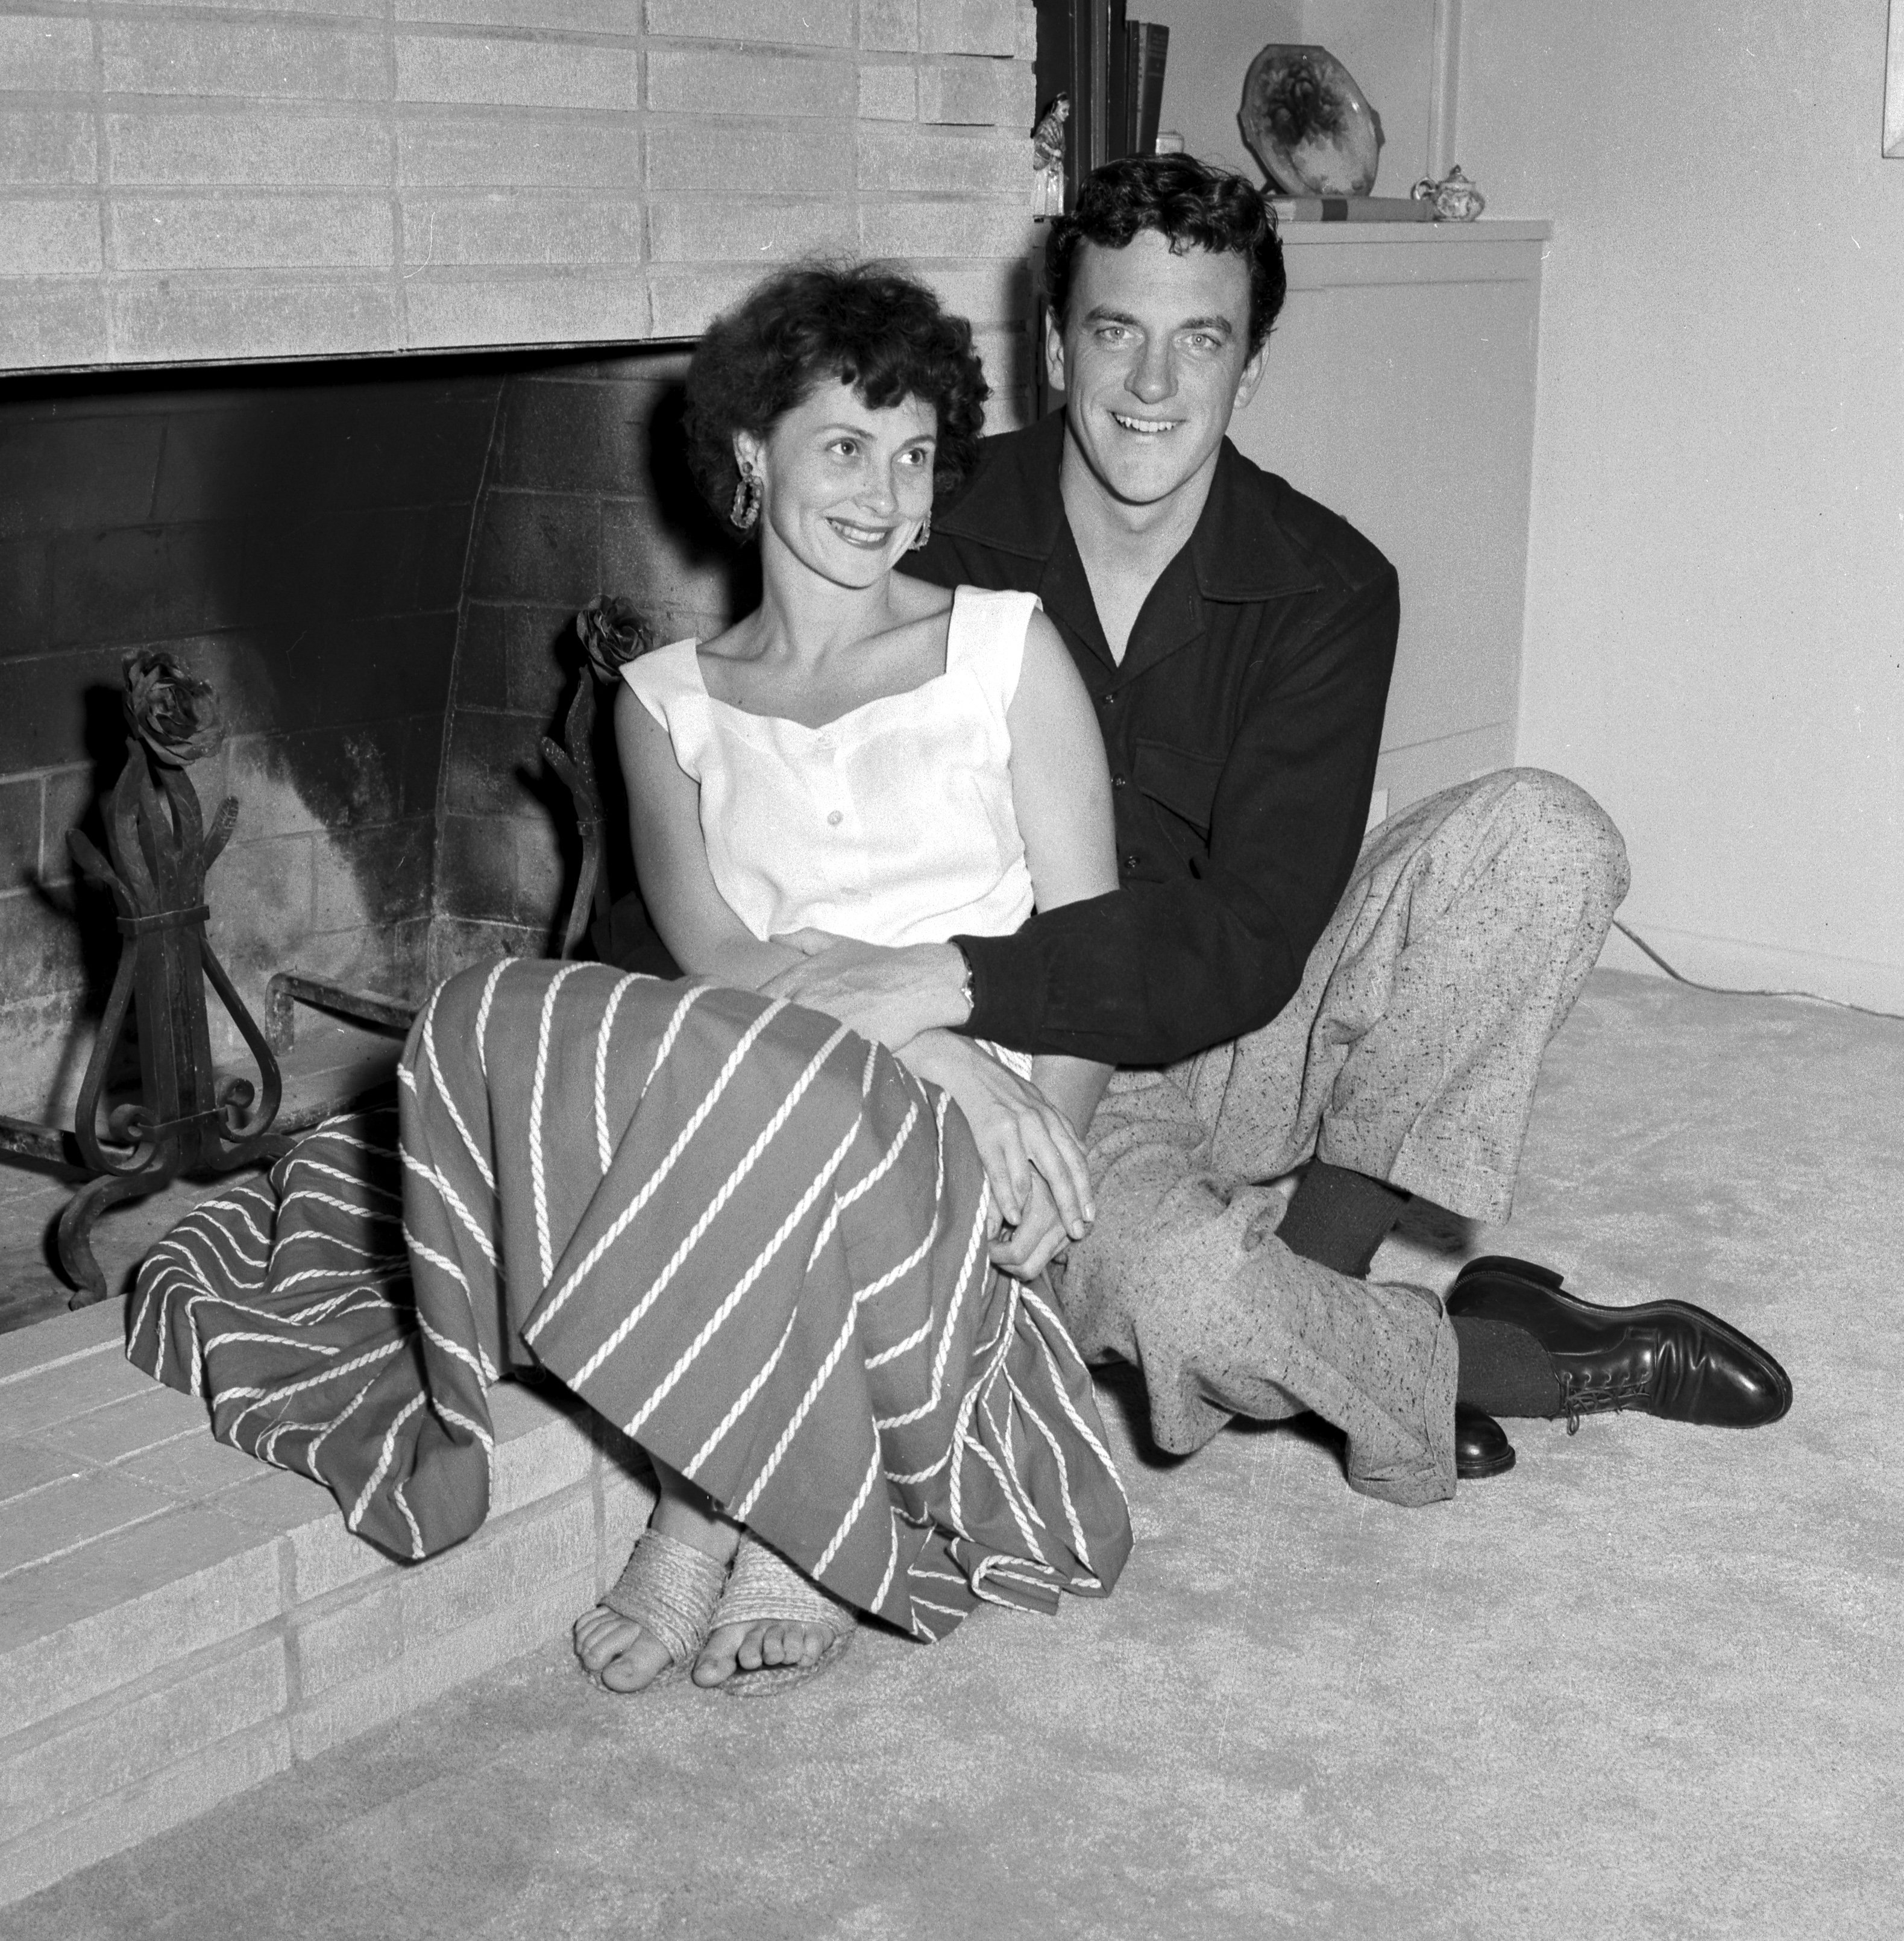 Virginia Arness and James Arness at home. Image date July 23, 1955. | Source: Getty Images